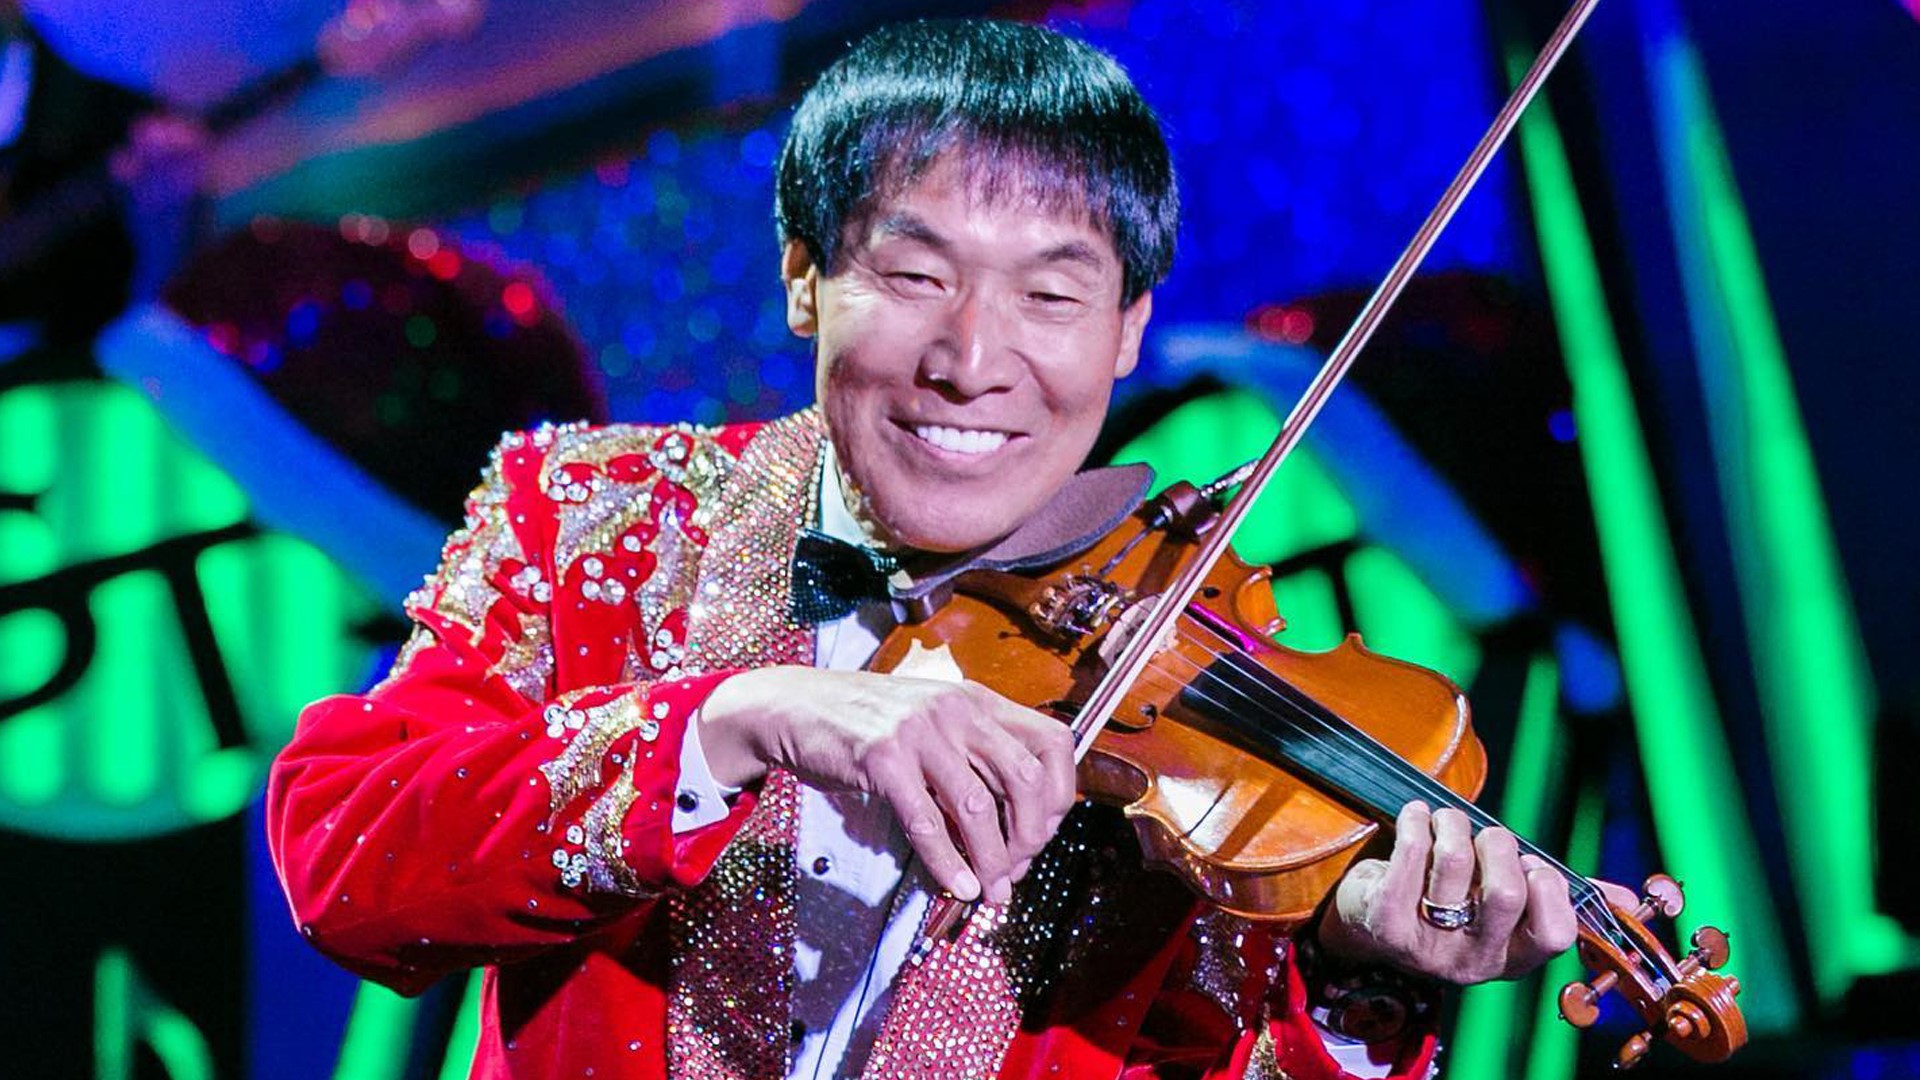 Violinist Shoji Tabuchi, a staple in Branson died Friday at 79. Tabuchi was best known for the eponymous family variety show that entertained legions of fans.